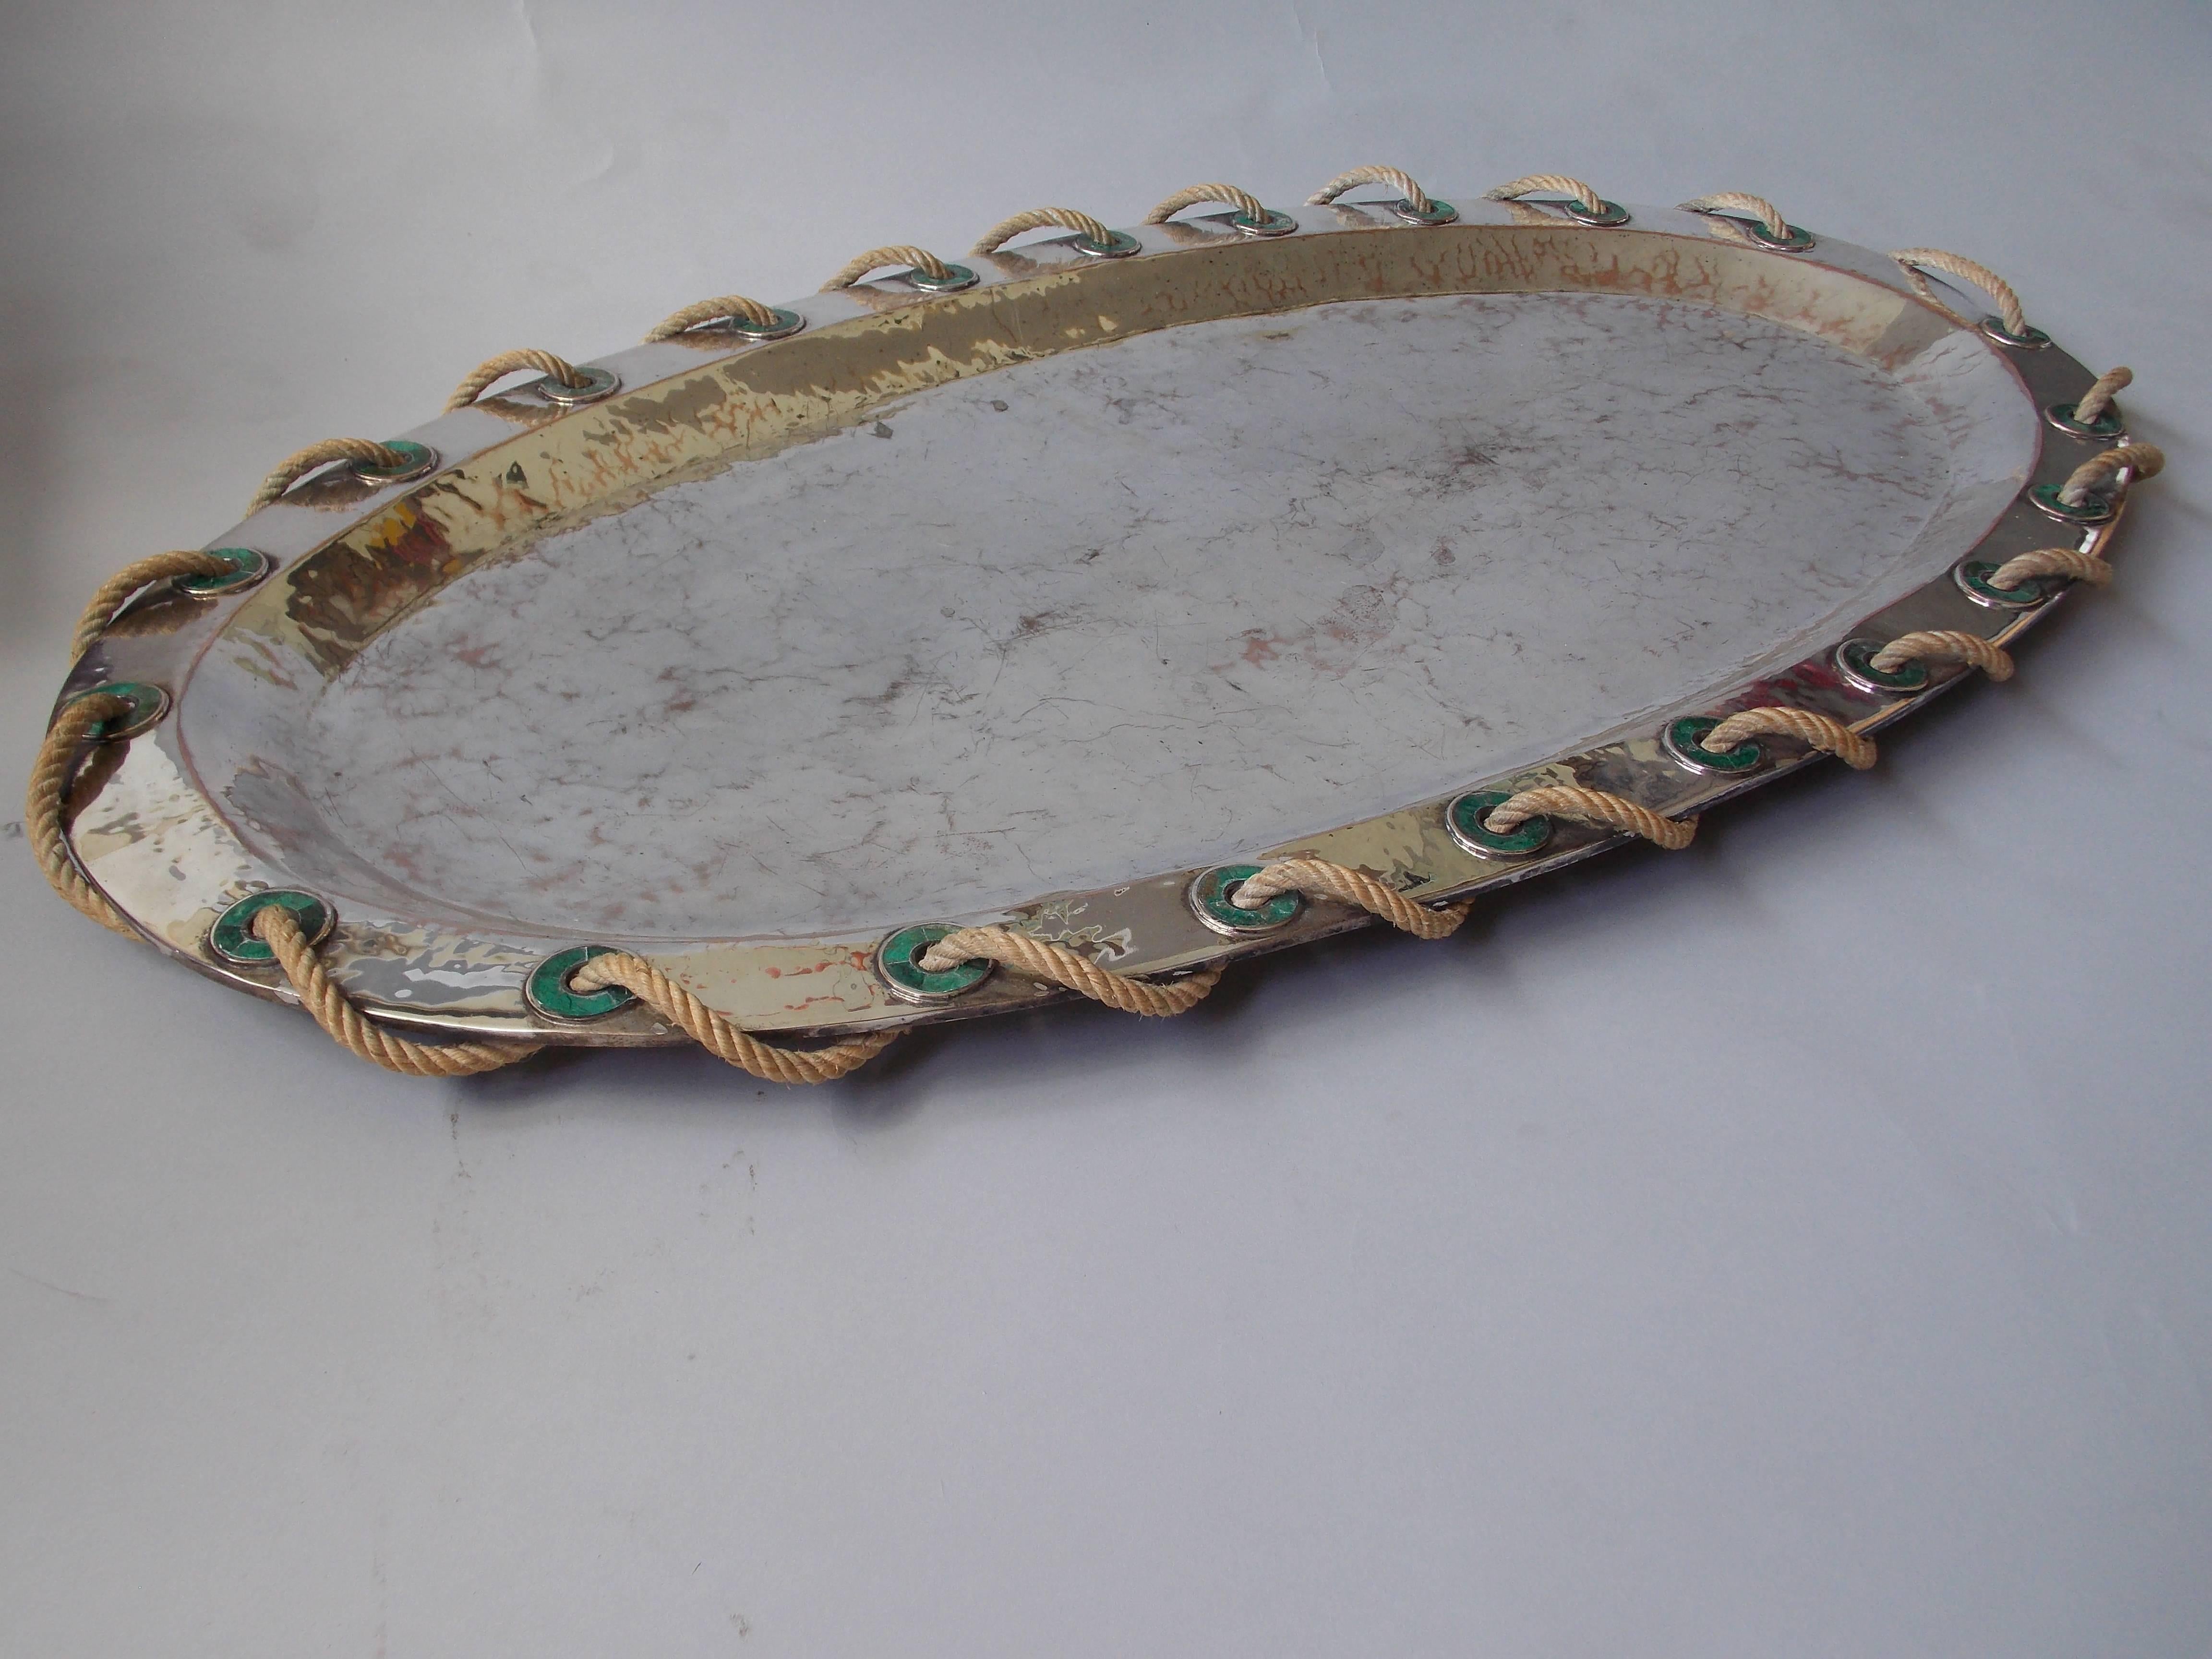 A nice big decorative tray.
Hand-hammered brass with silver plating, malachite stone and rope detailing.
It's stamped on the bottom with hallmarks.
It has the original wear or patina consistent with age, no damage.
It will look great on a large